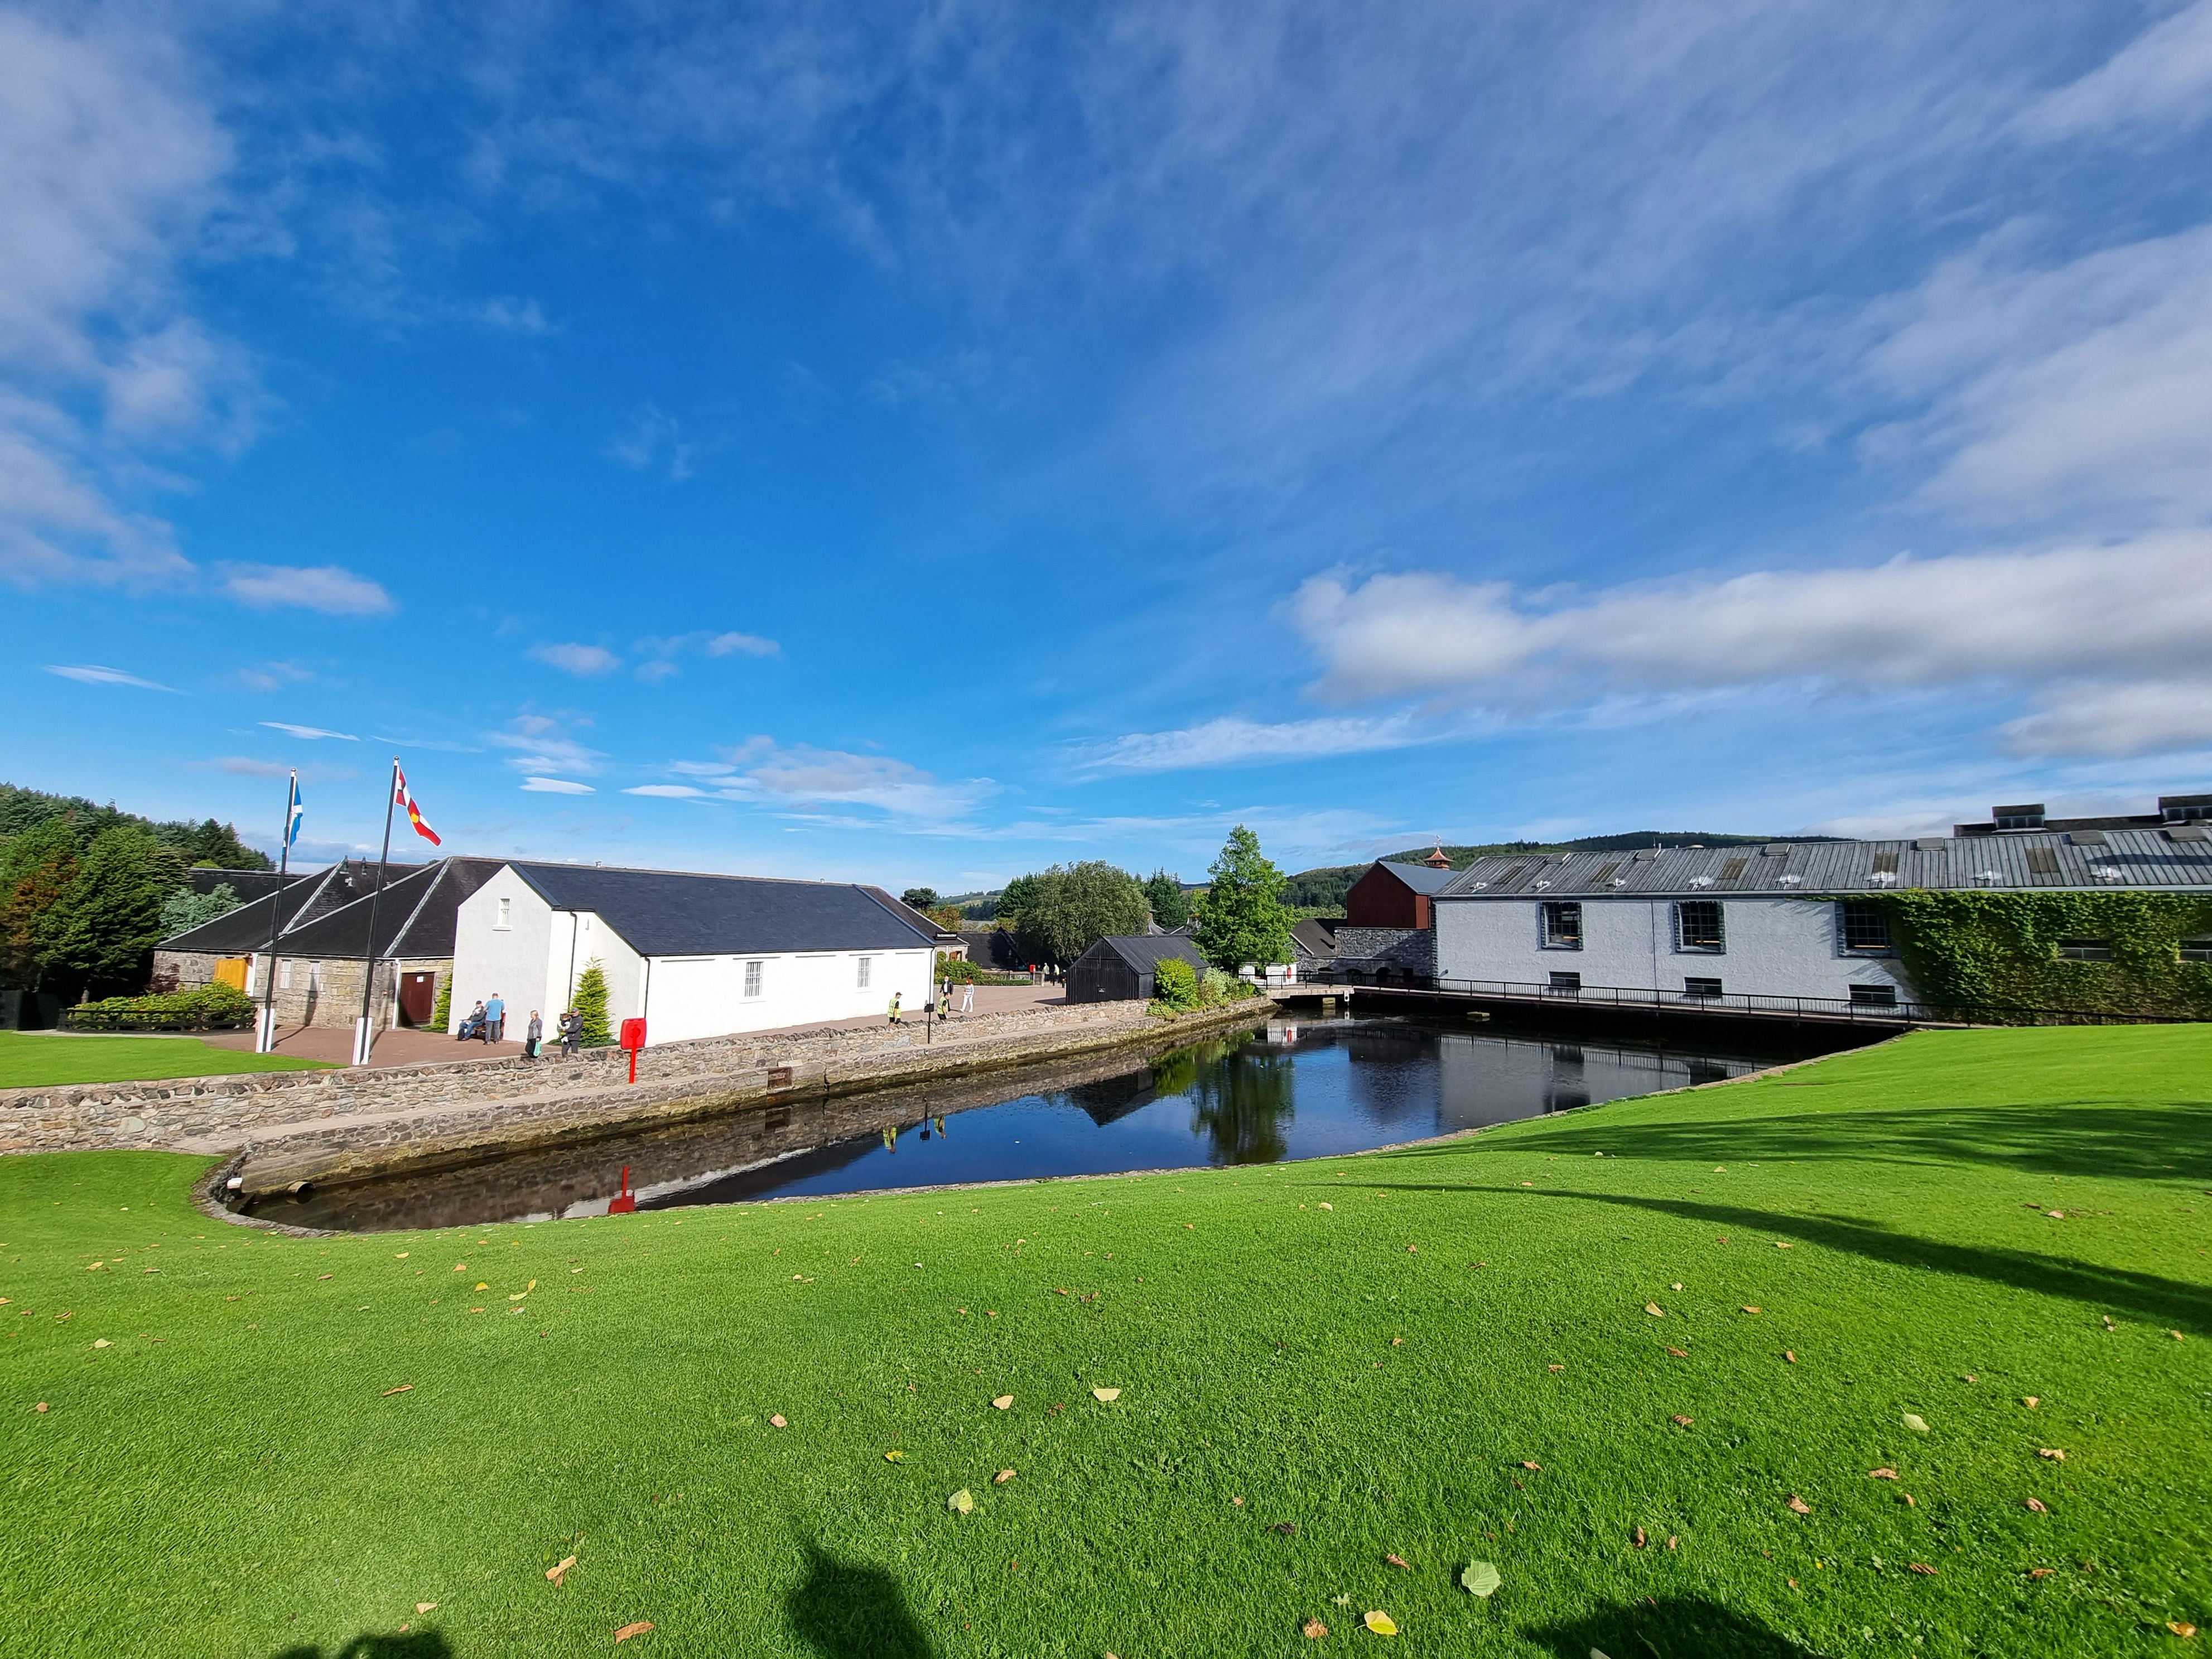 <p>Location: Glenfiddich Distillery, Dufftown, Banffshire, Scotland, AB55 4DH</p><p>Contact Info: +44 1340 820373, glenfiddich.com</p><p>Another must-visit destination in the Speyside region is the Glenfiddich Distillery, one of the world's most famous producers of single malt Scotch whisky. Founded in 1887, the distillery is still family-owned and operated, ensuring a strong commitment to quality and tradition. Visitors can choose from several tour options, including the exclusive Pioneers Tour, which provides an in-depth look at the distillery's history, production process, and warehouses. After a tour, relax in the Malt Barn Bar, where you can savor a dram of Glenfiddich's finest whiskies, or enjoy a delicious meal at the on-site restaurant, which features seasonal, locally sourced ingredients.</p><p>A visit to any of these top 5 whiskey distilleries is sure to be an unforgettable experience for mature drinkers seeking to deepen their appreciation for the art and history of whiskey-making. From the rolling hills of Scotland to the rich heritage of Kentucky bourbon country, these destinations offer a unique opportunity to taste some of the world's most exceptional spirits while exploring the stories and craftsmanship behind them. So raise a glass, and toast to your next whiskey adventure!</p><p><i>This article was produced and syndicated by <a href="https://mediafeed.org/">MediaFeed.</a></i></p>  <h1>More from MediaFeed:</h1> <ul><li><b><a href="https://www.msn.com/en-us/news/other/inside-nascar-legend-tony-stewarts-luxury-compound-set-on-a-415acre-hunting-preserve/ss-AA19e6OE">Inside NASCAR legend Tony Stewart’s luxury hunting preserve</a></b></li> <li><b><a href="https://www.msn.com/en-us/news/other/this-is-the-1-mosthated-fast-food-chain-in-america/ss-AA19aBMW">This is the #1 most-hated fast food chain in America</a></b></li><li><b><a href="https://www.msn.com/en-us/news/other/18-secret-bonuses-of-a-costco-membership/ss-AAXBUKo">18 best Costco membership benefits</a></b></li>  </ul> <h2>Like MediaFeed's content? <a href="https://www.msn.com/en-us/community/channel/vid-ckv6hf6hjif65e0cjnm83s7yb2y0w5xmun0j4refire0ev6727is">Be sure to follow us.</a></h2>